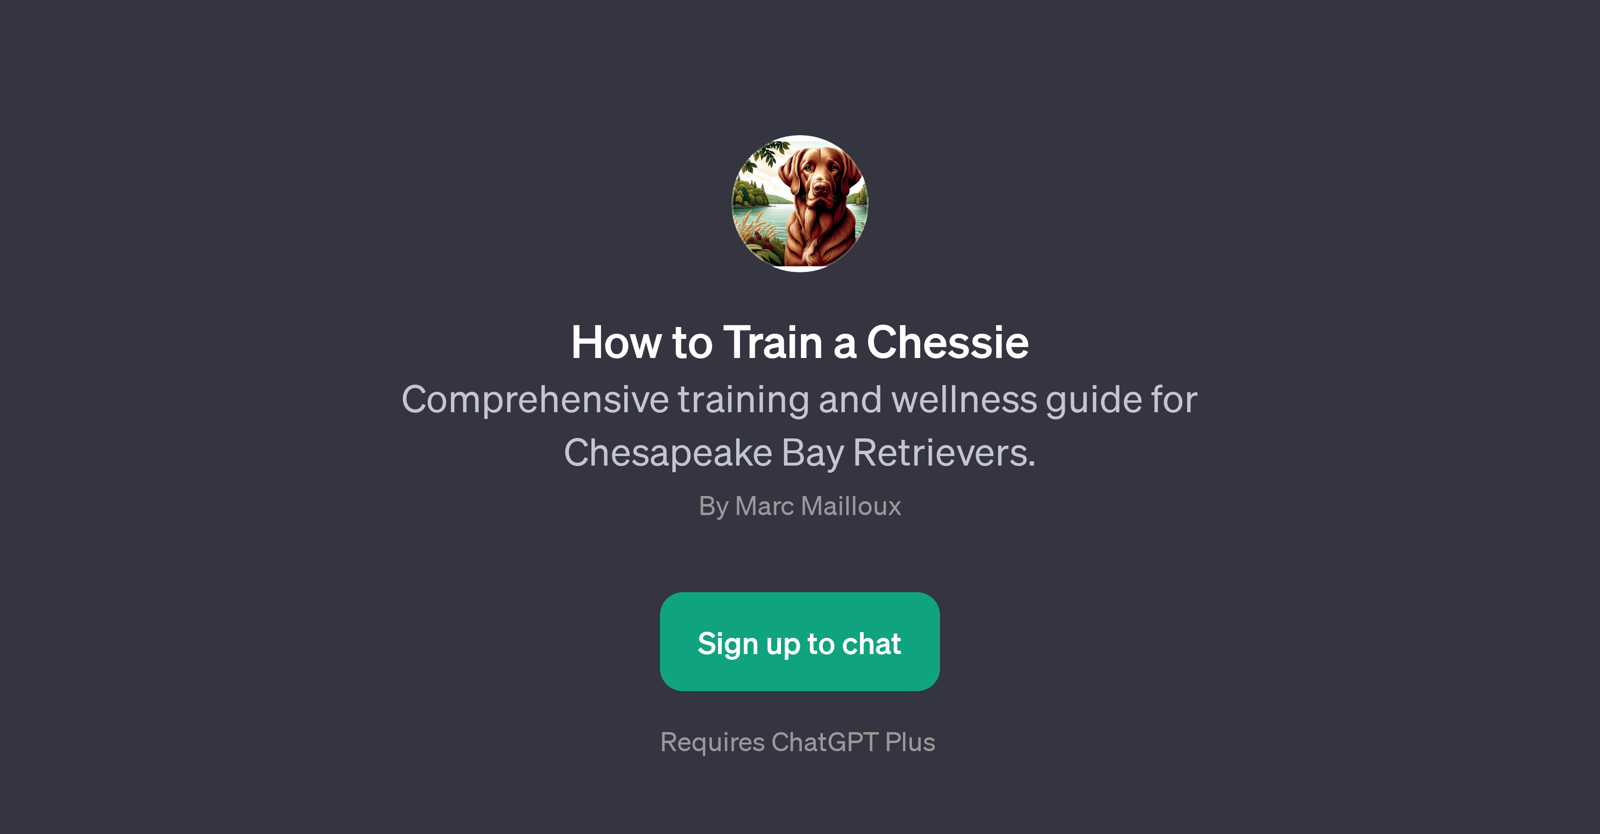 How to Train a Chessie website